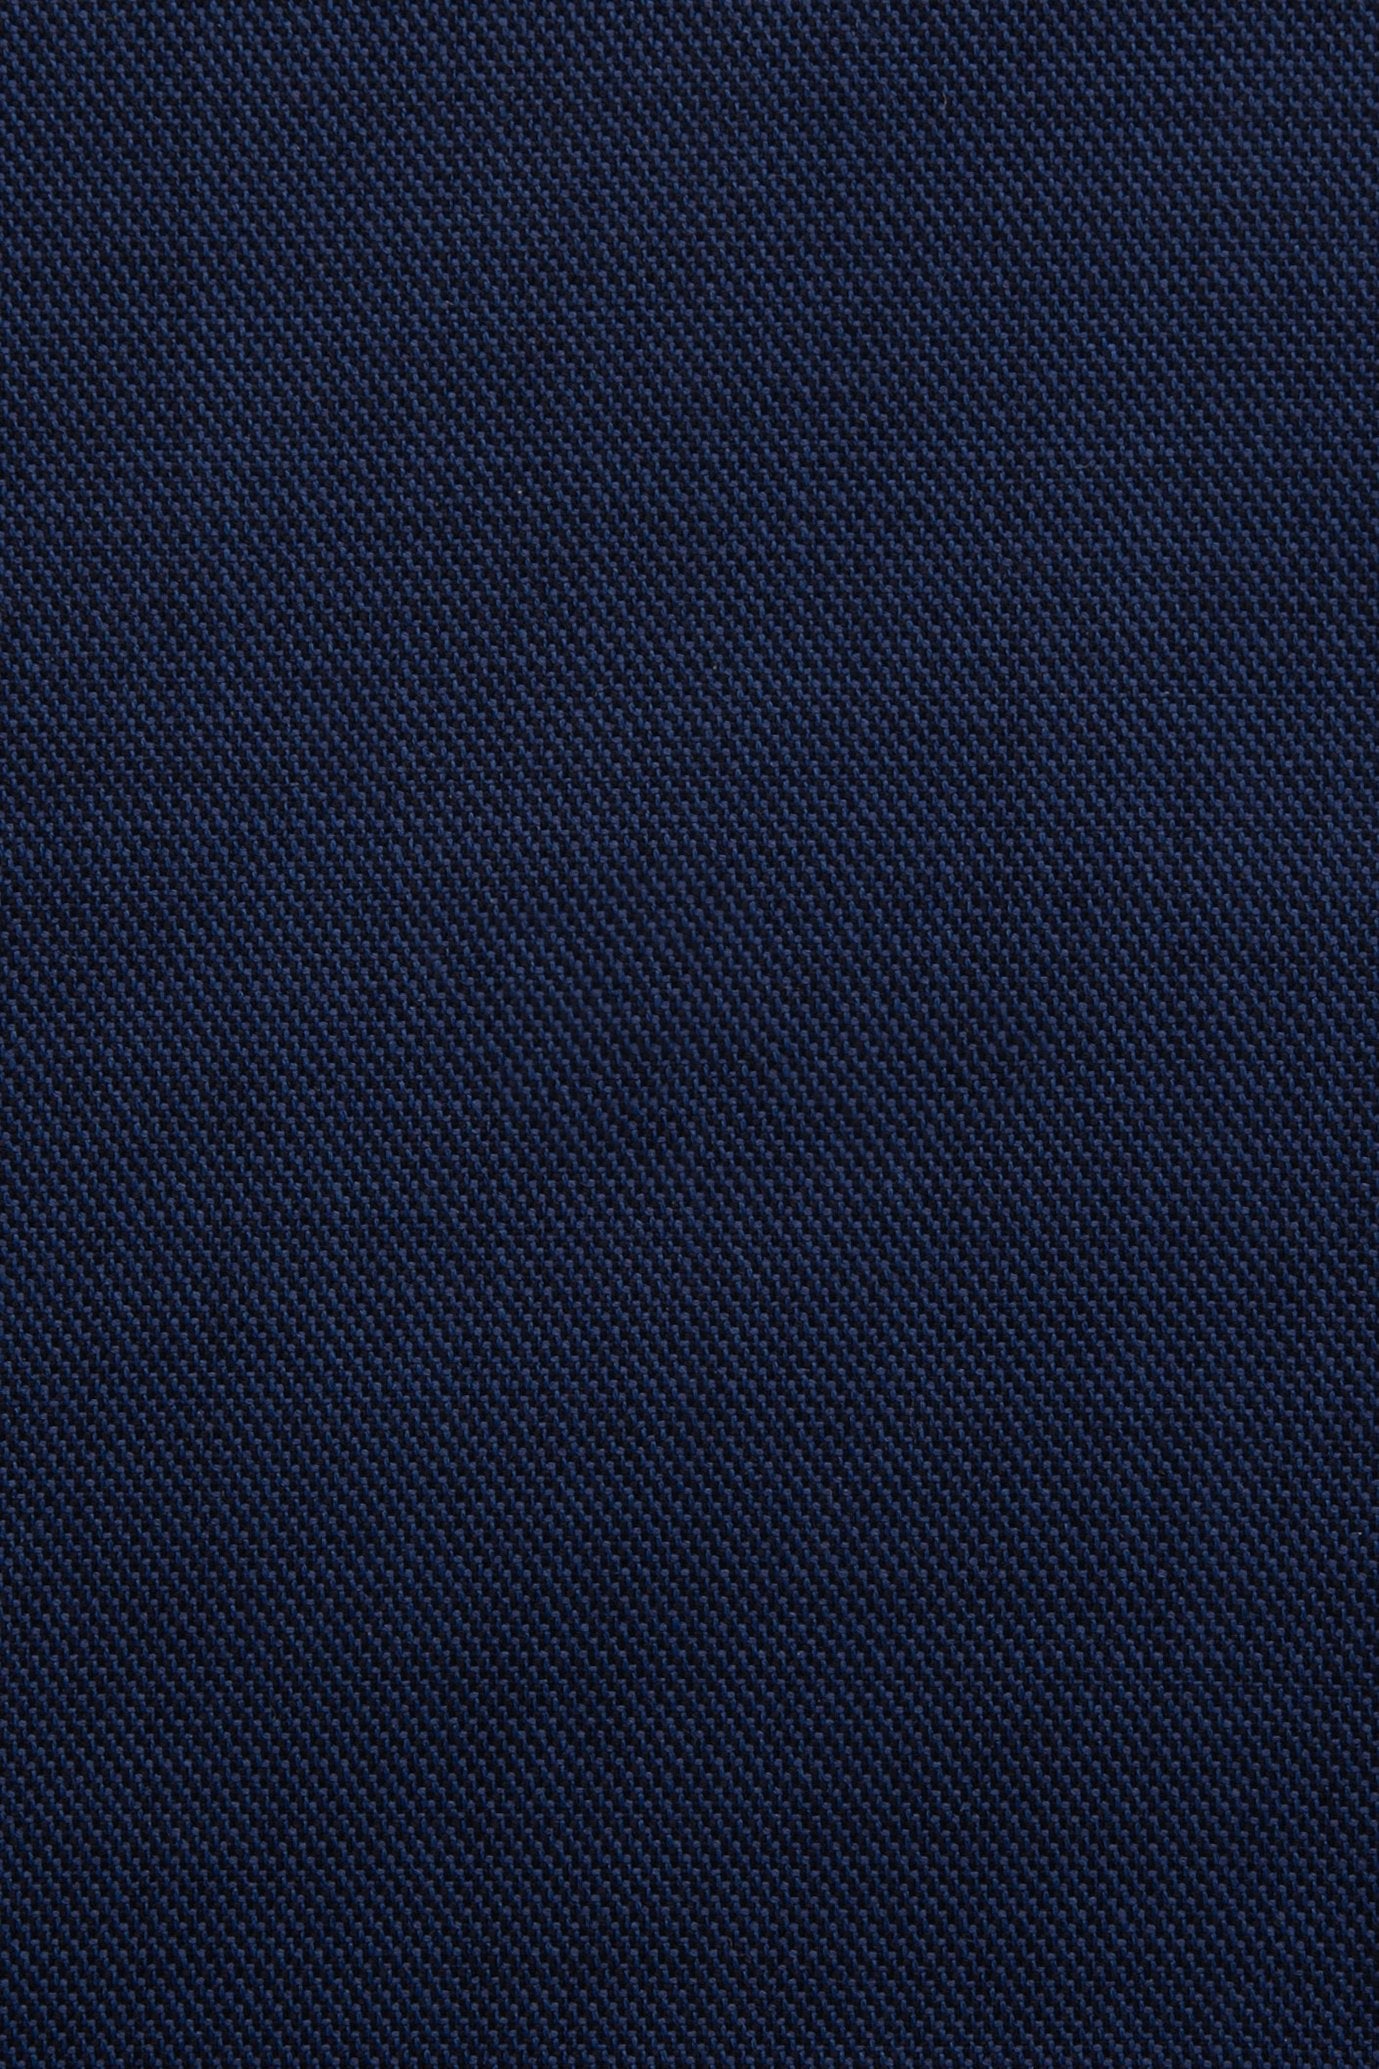 
                  
                    Light navy sharkskin wool suit fabric swatch made in Italy
                  
                